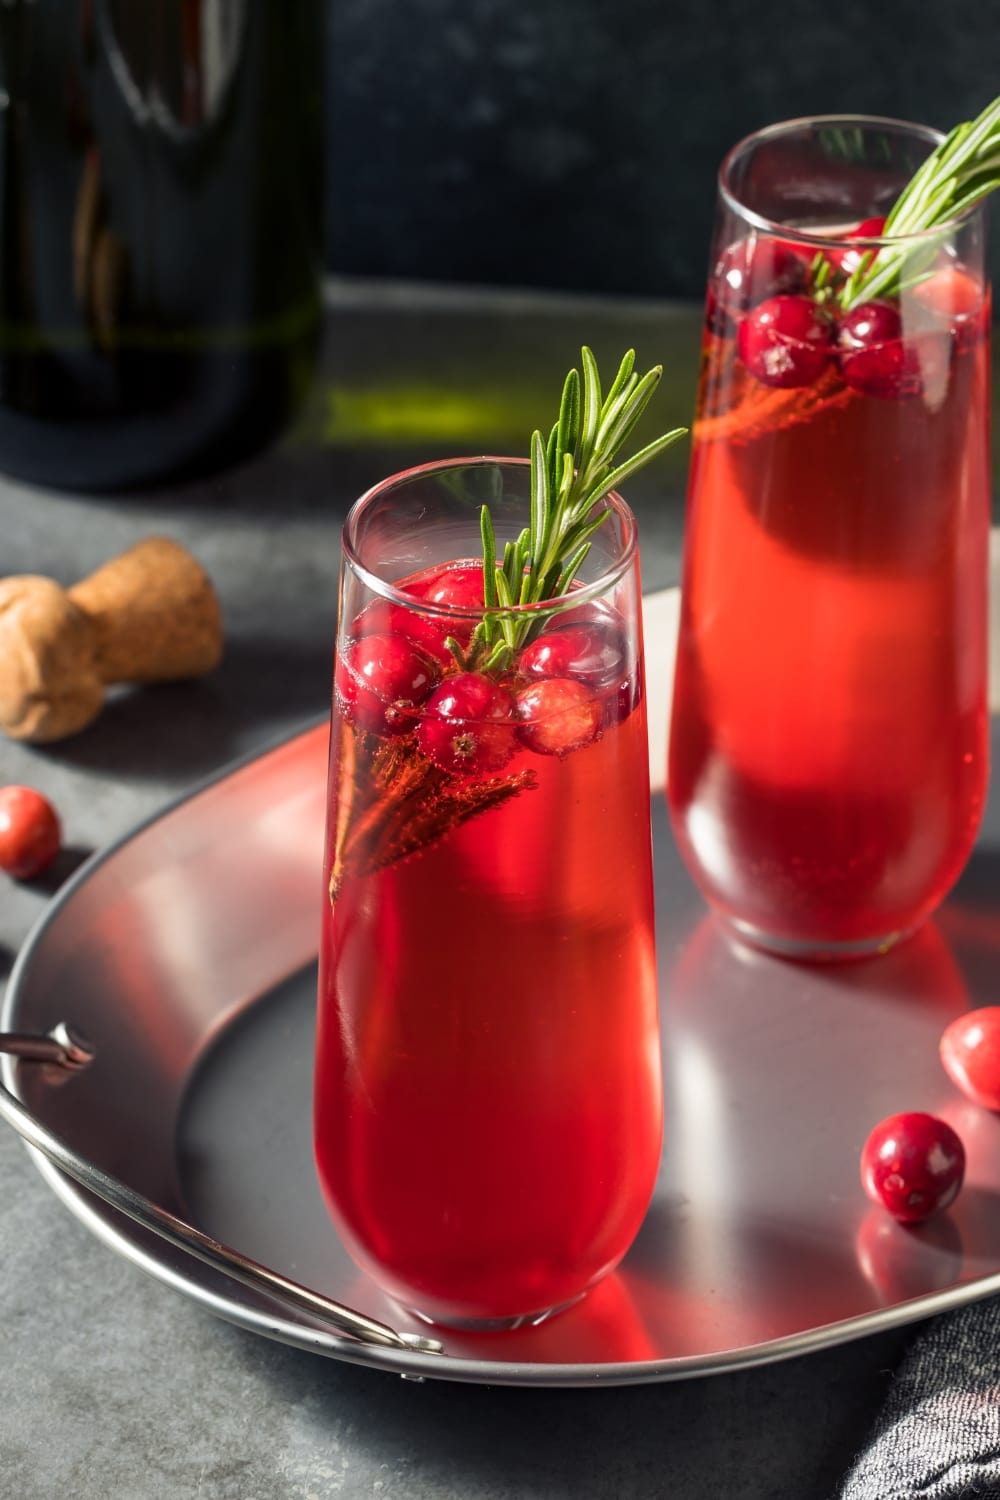 Two Glasses of Boozy Poinsettia Cocktail Garnished with Cranberry and Prosecco